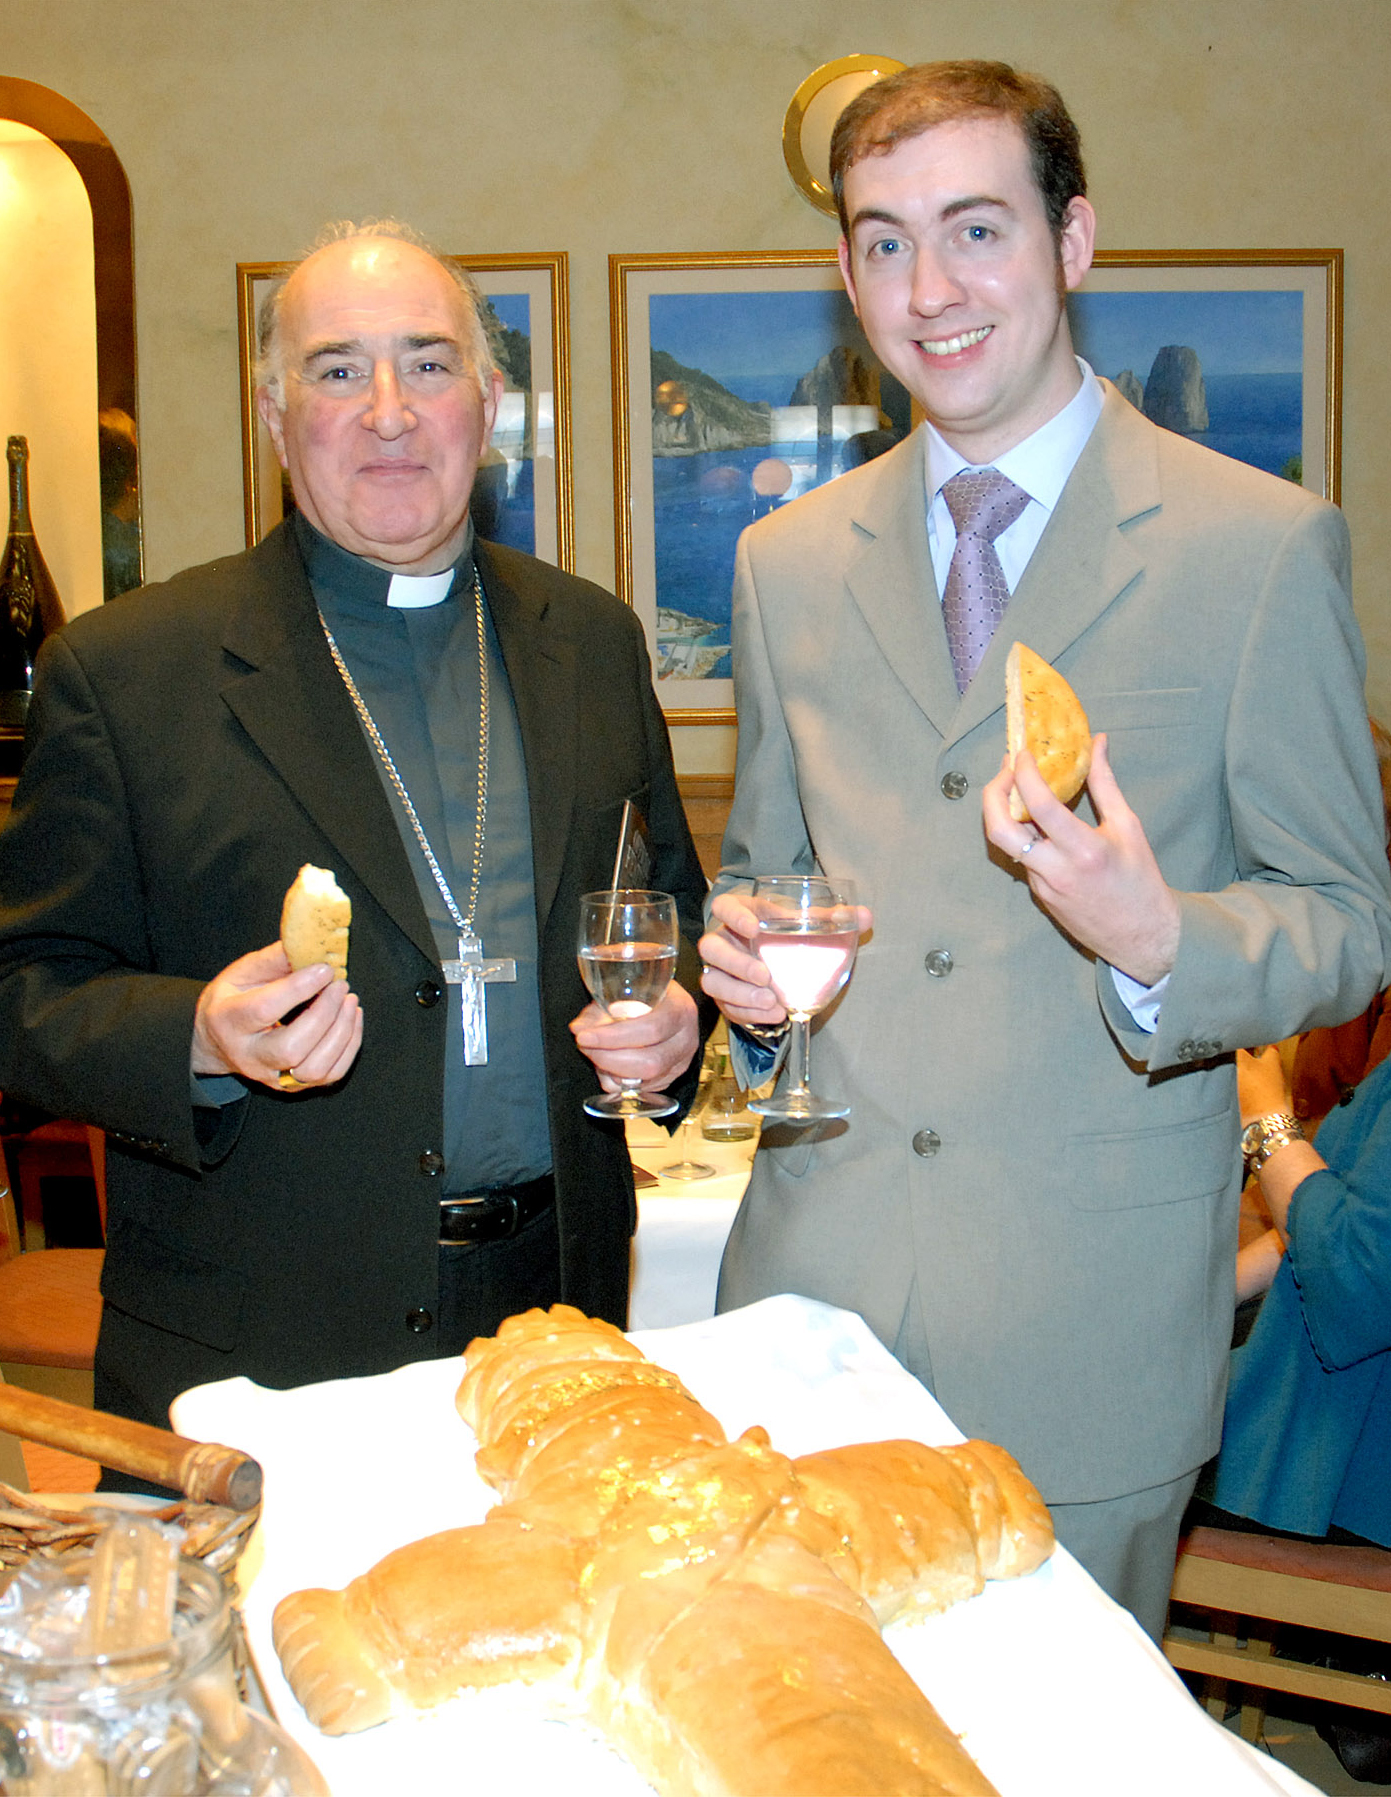 Archbishop Mario Conti with Stephen Callaghan at Lentfest 2008